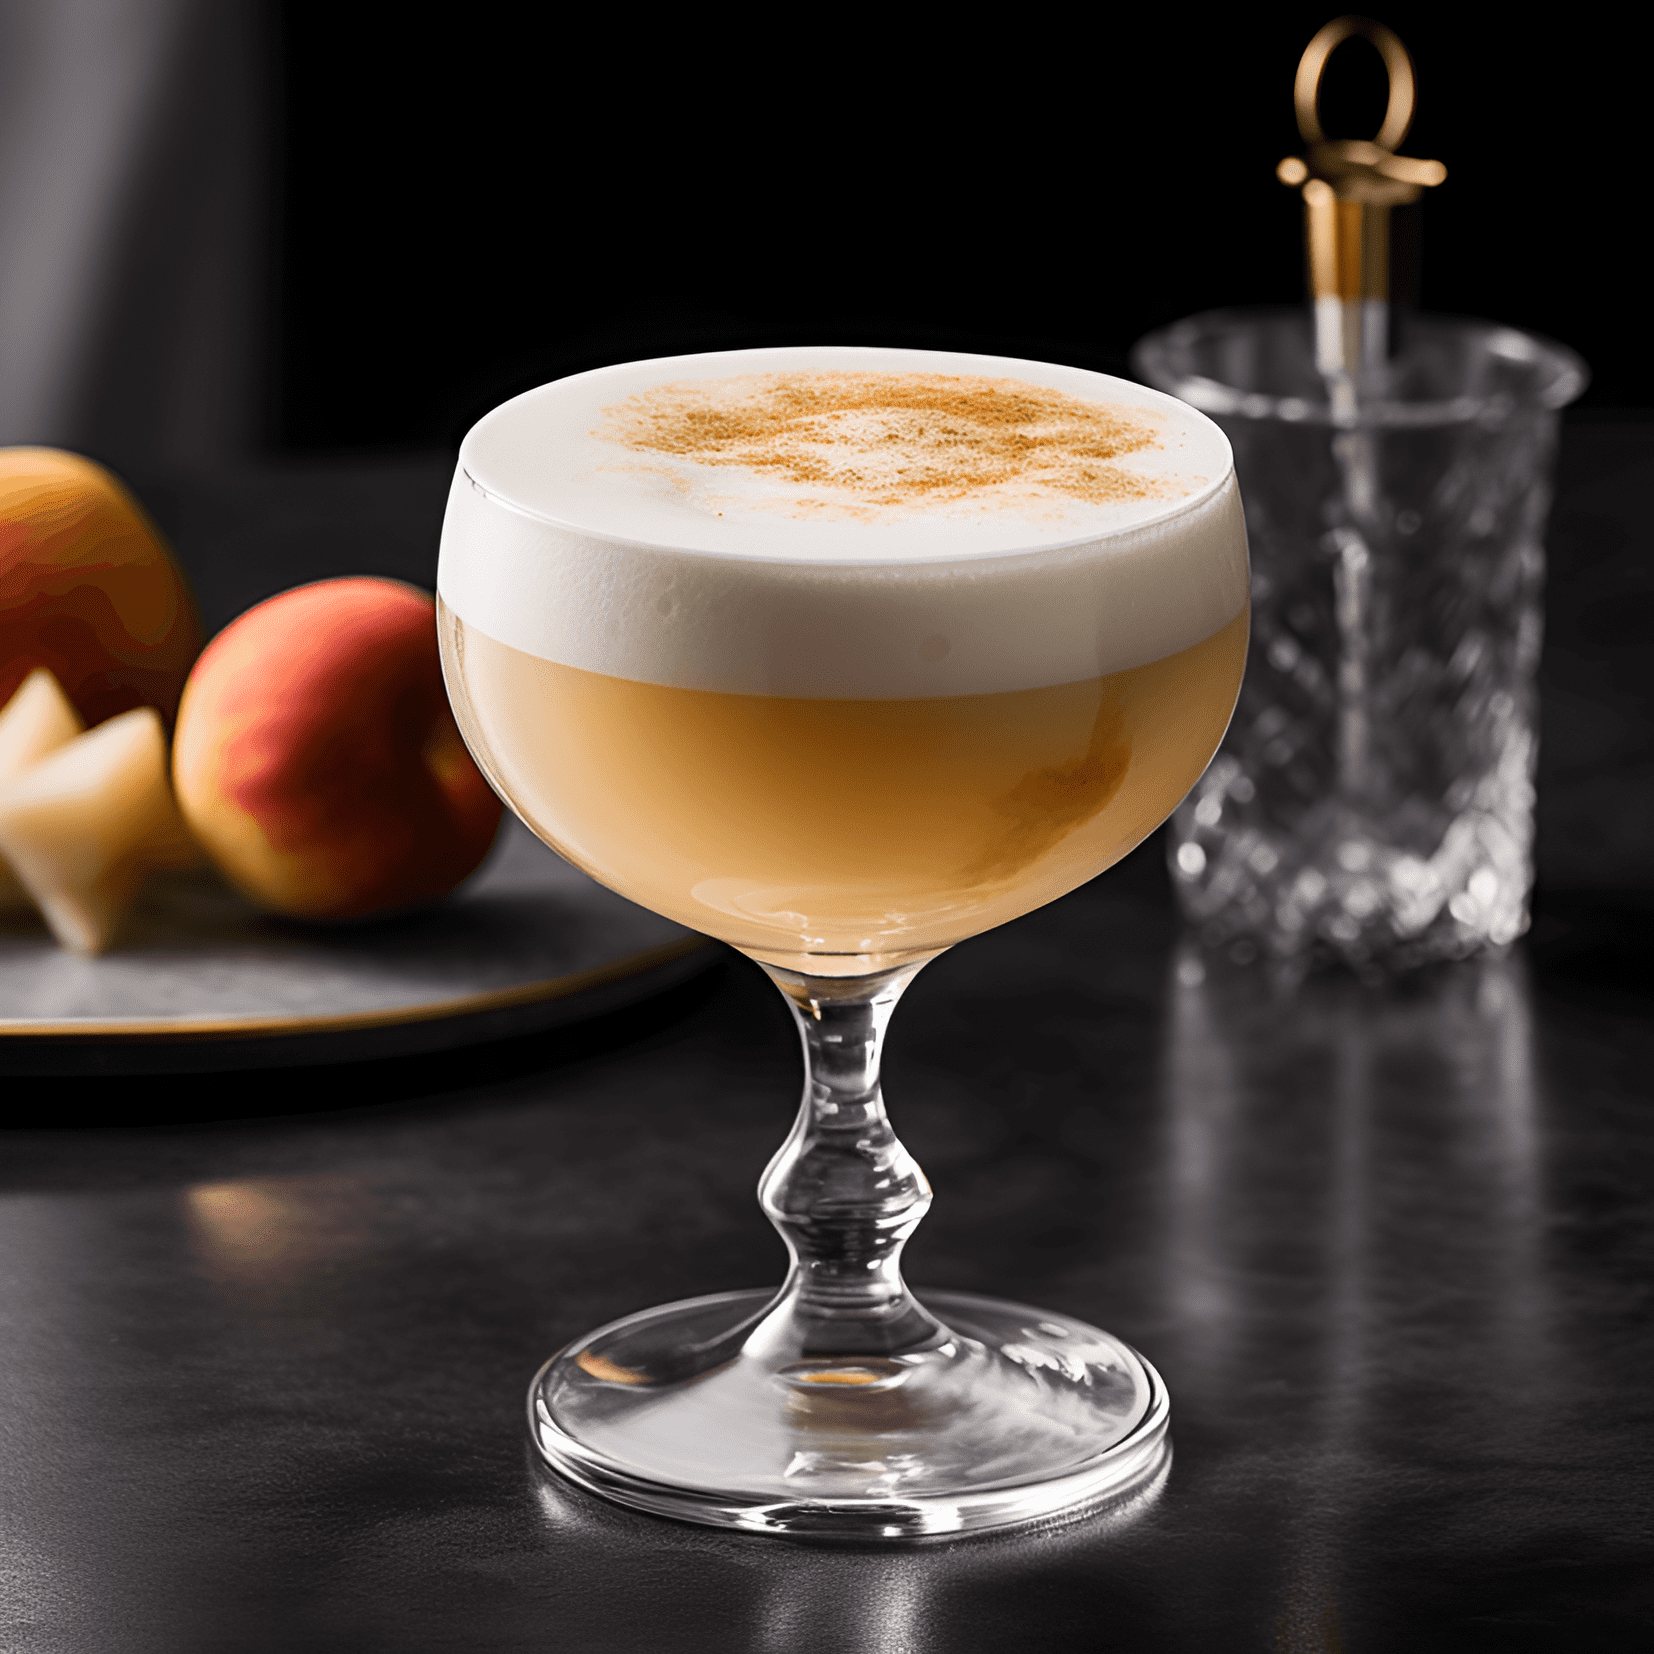 Apple Brandy Sour Cocktail Recipe - The Apple Brandy Sour is a well-balanced cocktail, with a perfect blend of sweet and sour flavors. The apple brandy provides a rich, fruity taste, while the lemon juice adds a refreshing tang. The simple syrup adds just the right amount of sweetness, making this cocktail a delightful and satisfying drink.